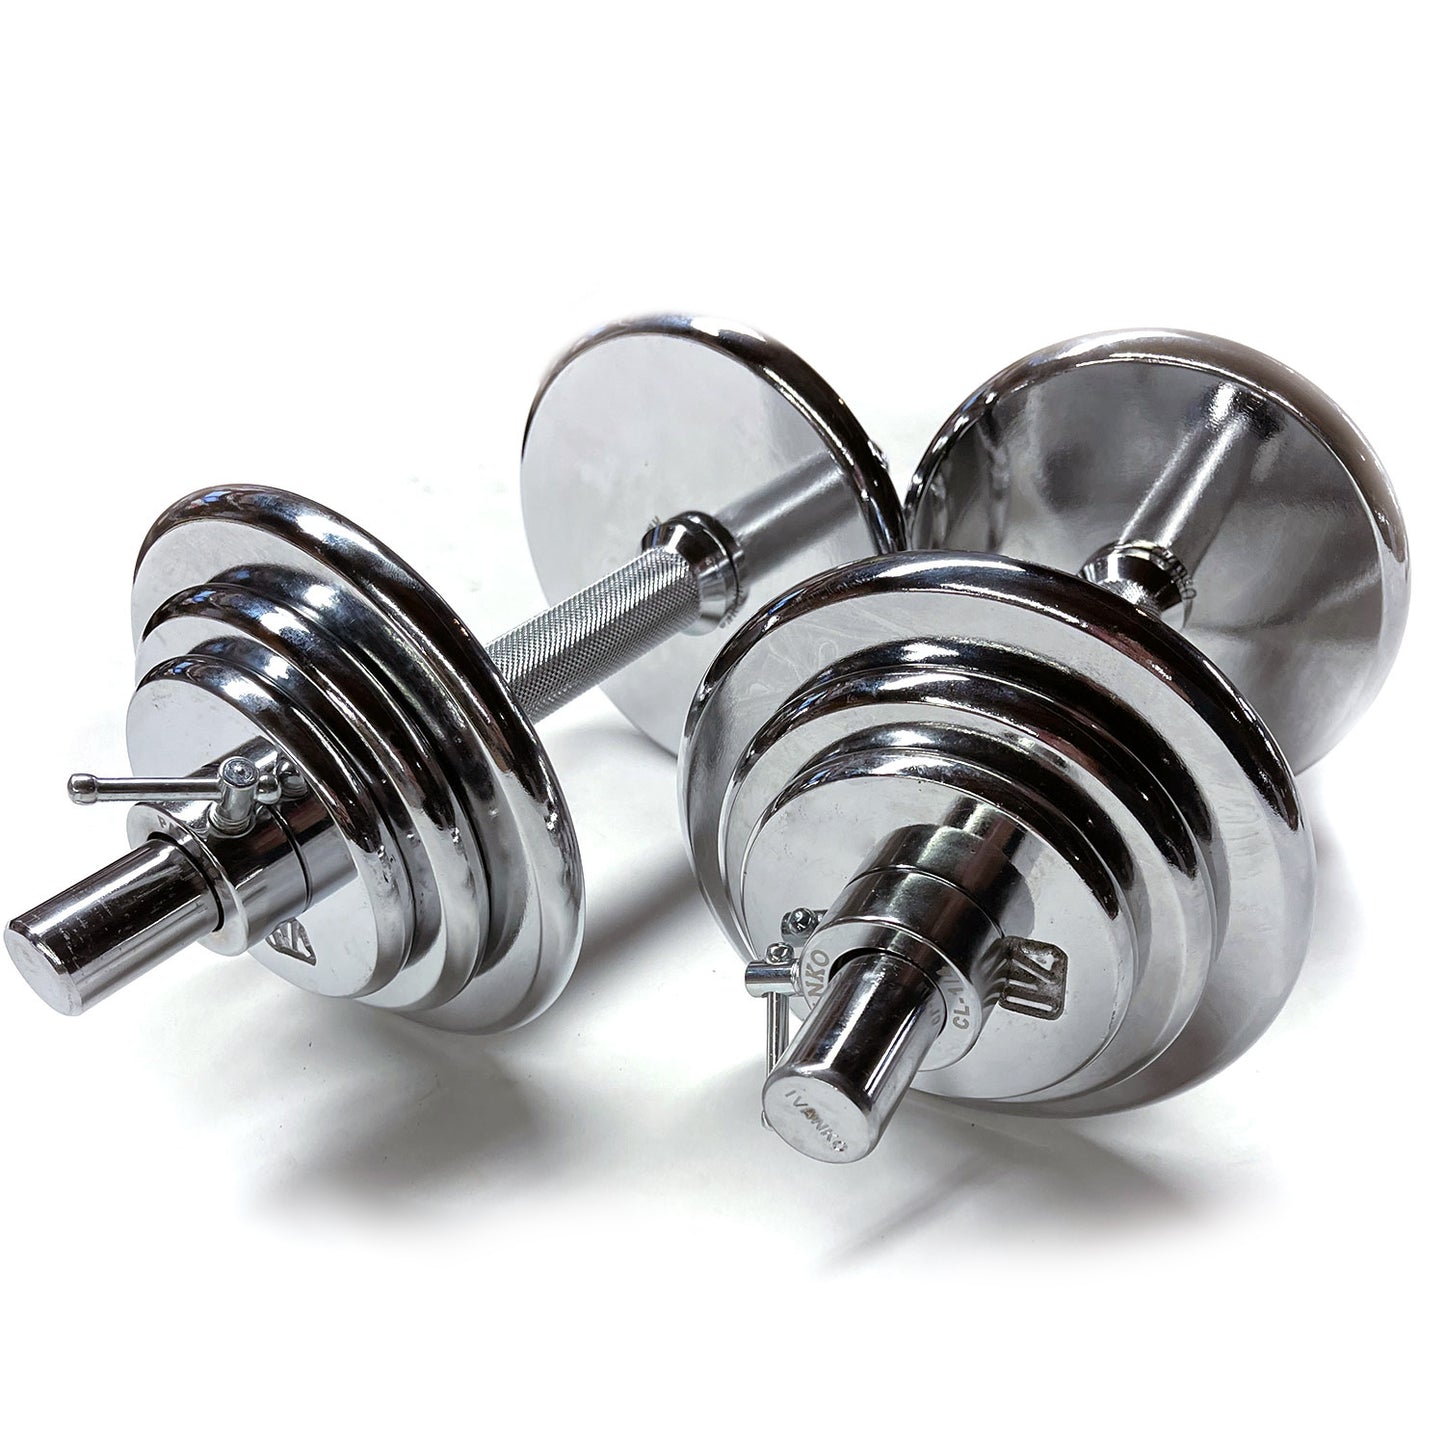 Adjustable weight dumbbell set | ULTIMO-45